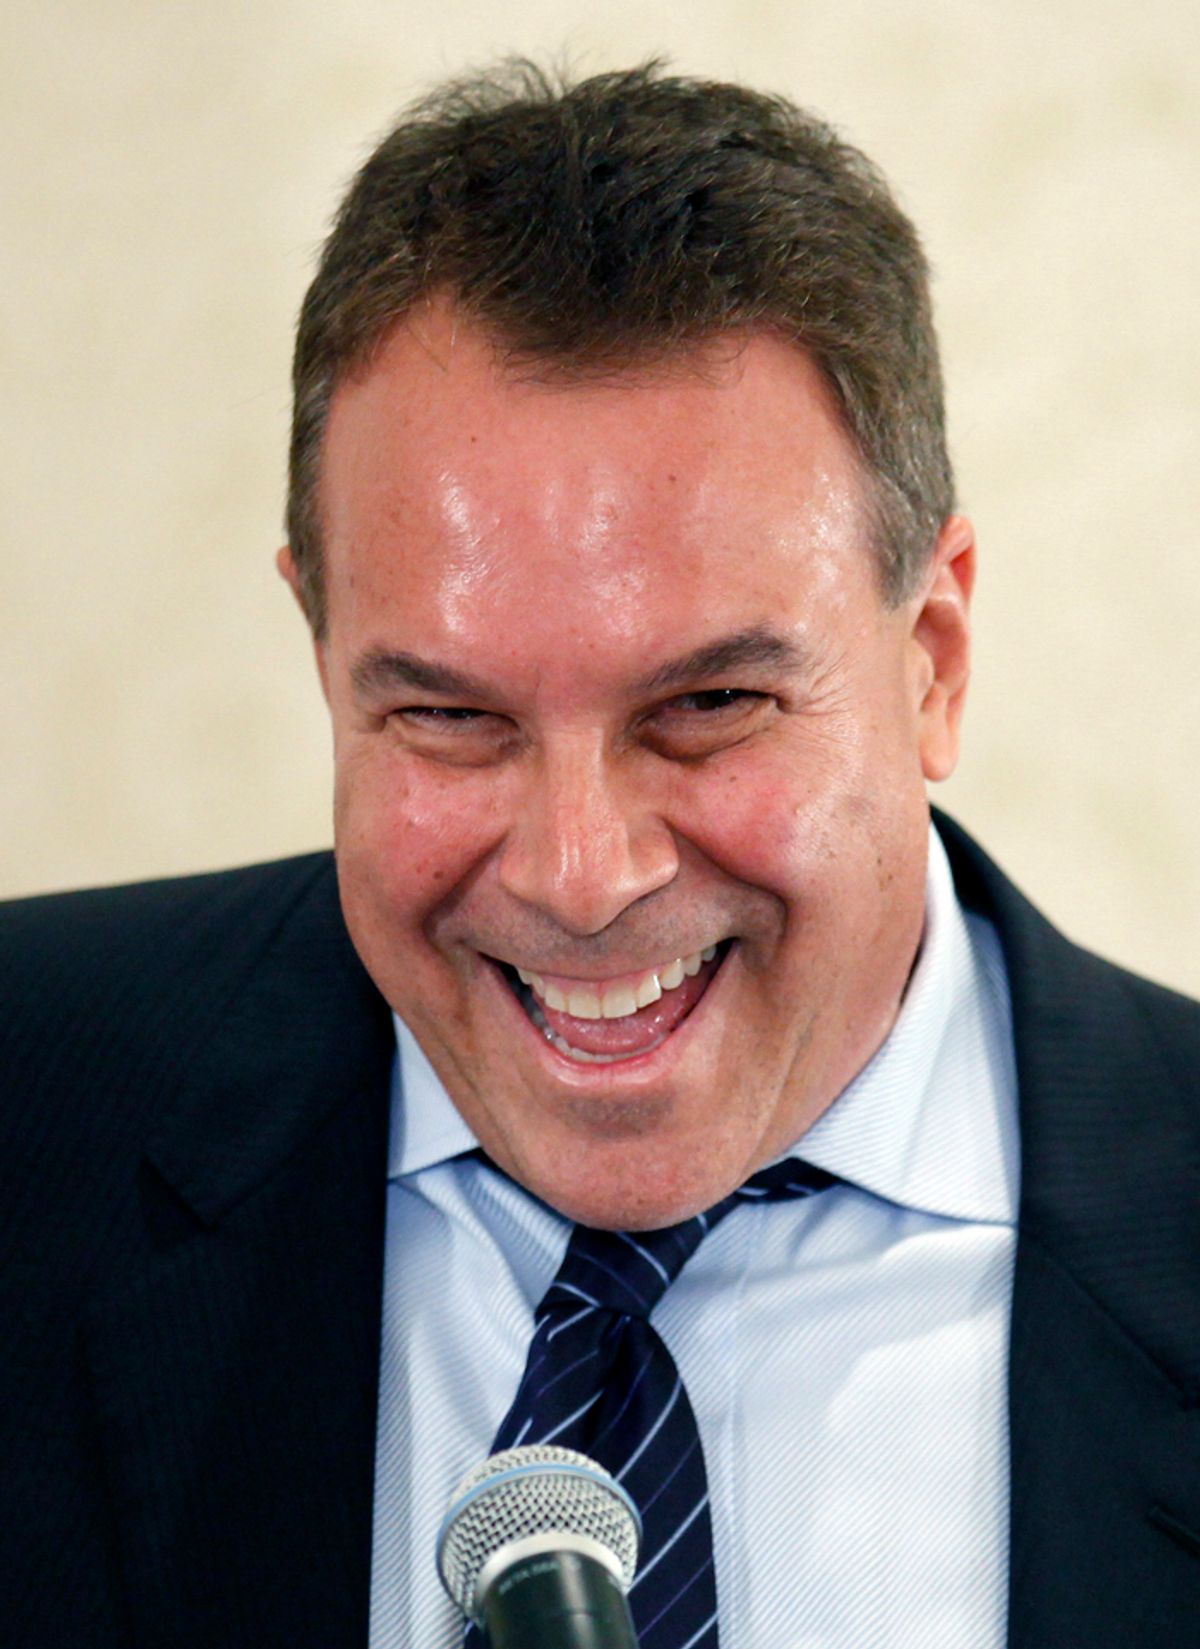 Jeff Greene, democratic hopeful for Florida's U.S. Senate seat, laughs as he answers a question while speaking at the Florida Press Association and FSNE annual meeting Thursday, June 17, 2010, in Sarasota, Fla.  (AP Photo/Chris O'Meara) (Chris O'meara)